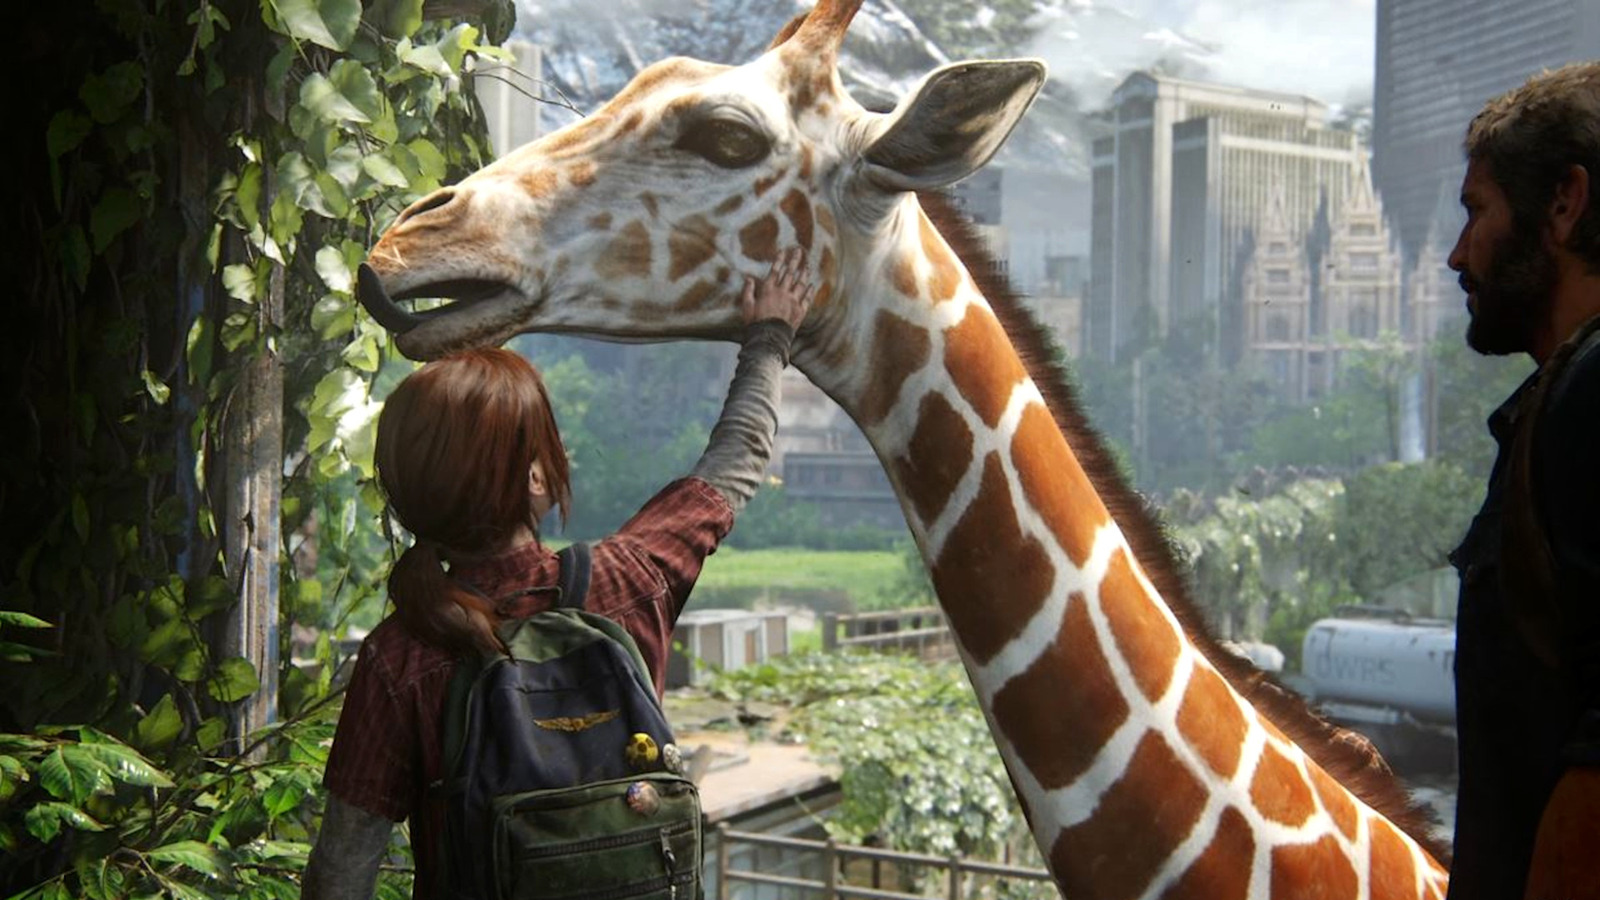 The Last Of Us fans want prequel with Joel, Tommy, and Tess